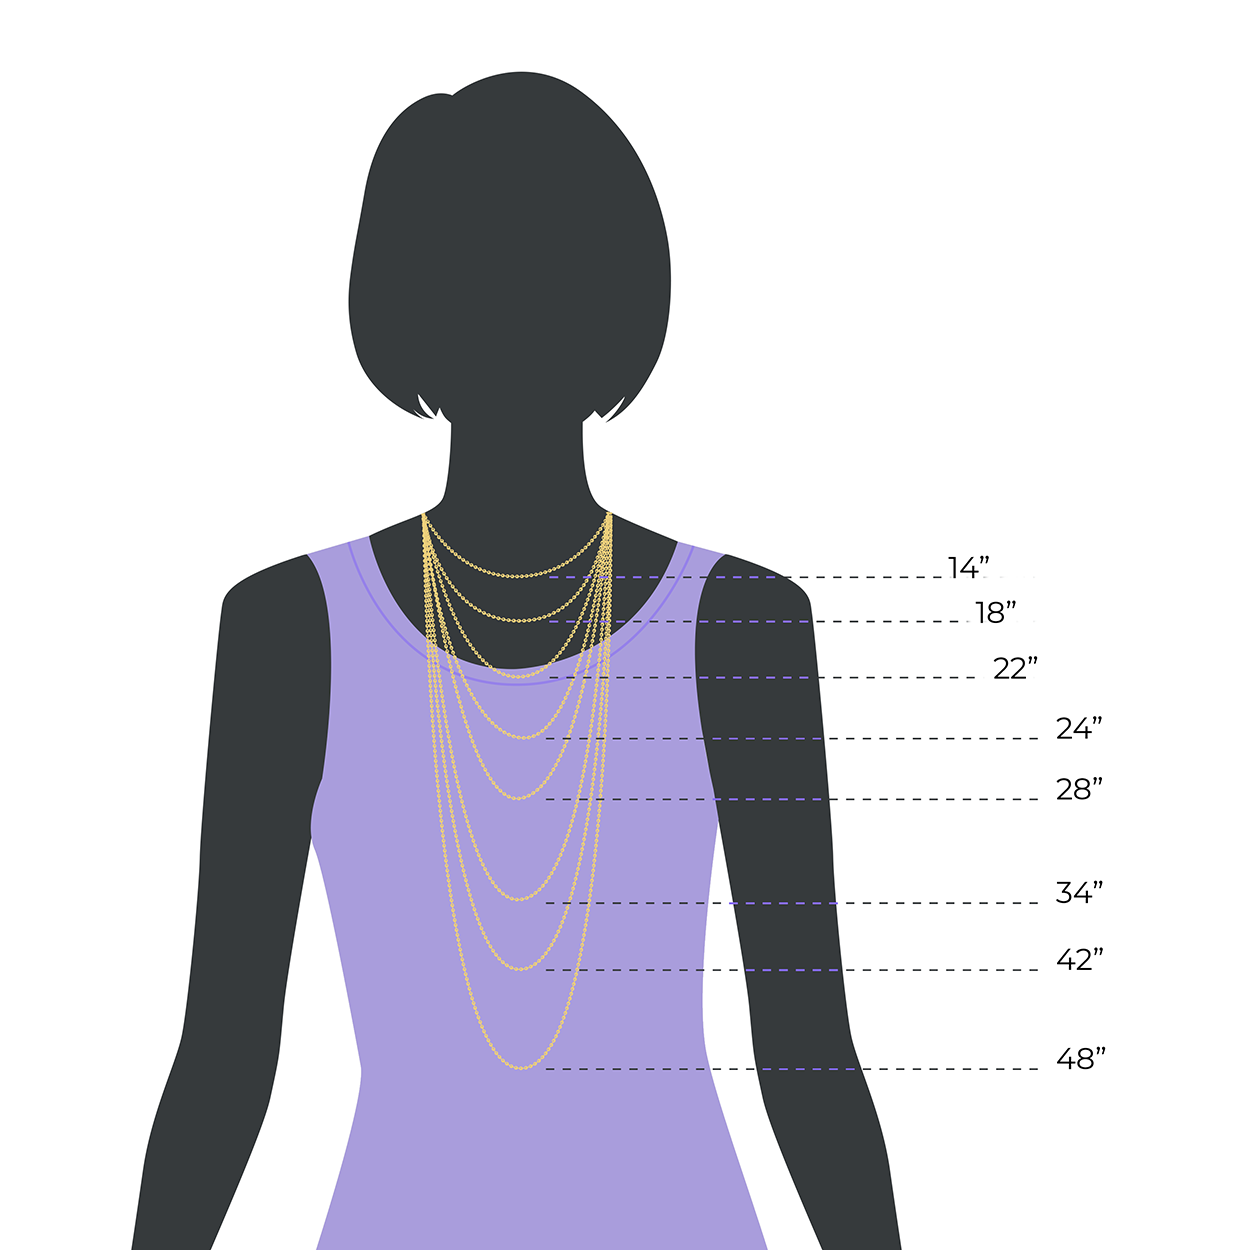 Necklace Length Guide with Female Silhouette